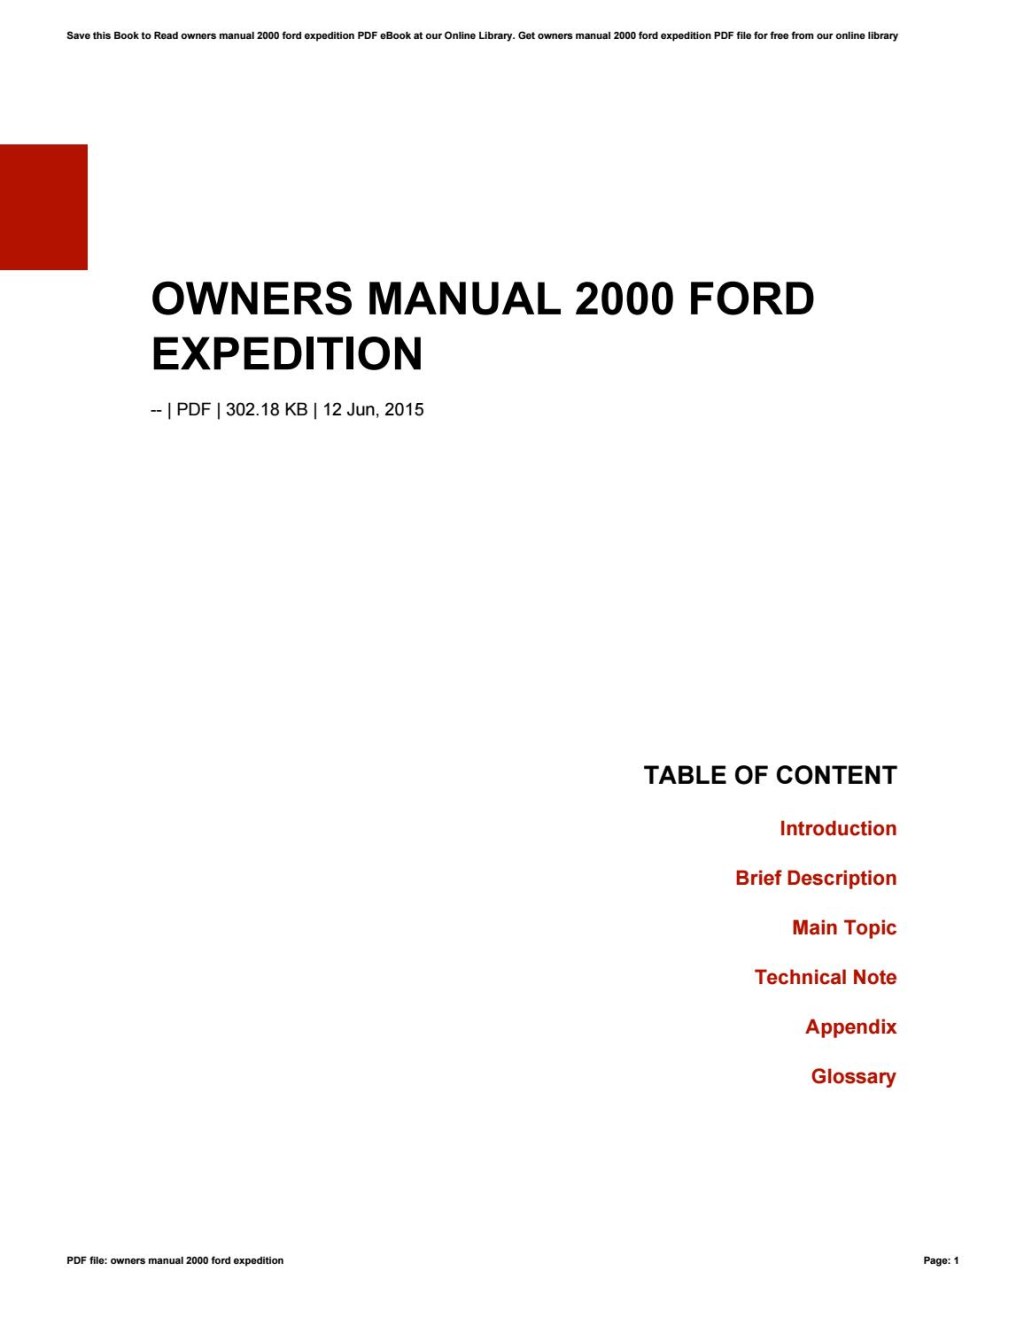 Picture of: Owners manual  ford expedition by WalterStrecker – Issuu